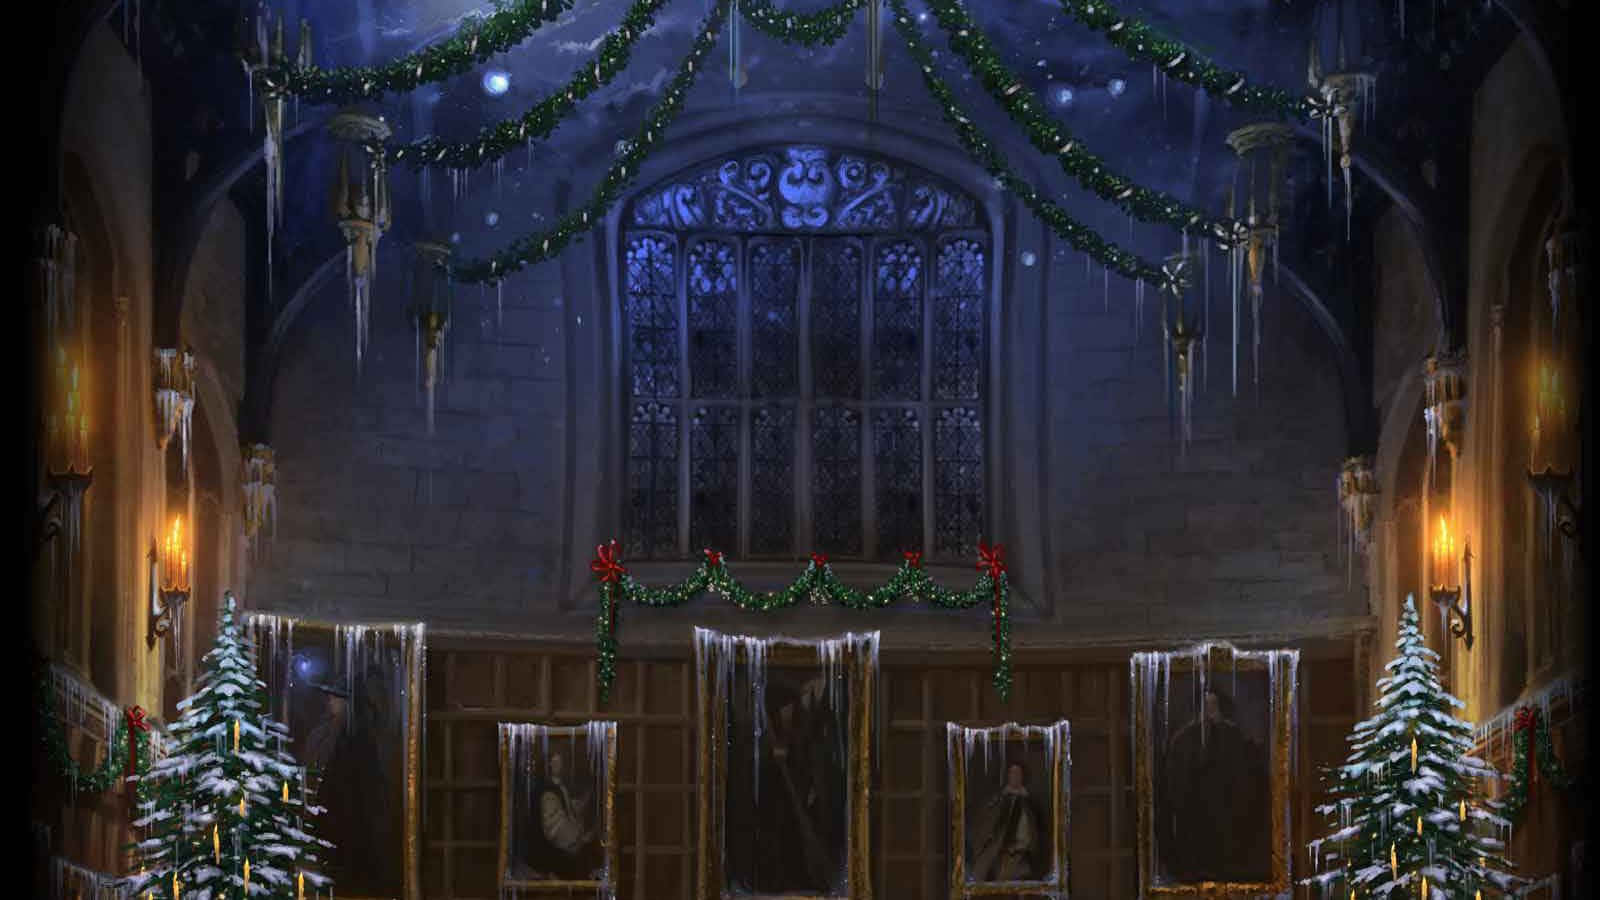 Enchanting Great Hall of Hogwarts School of Witchcraft and Wizardry Wallpaper